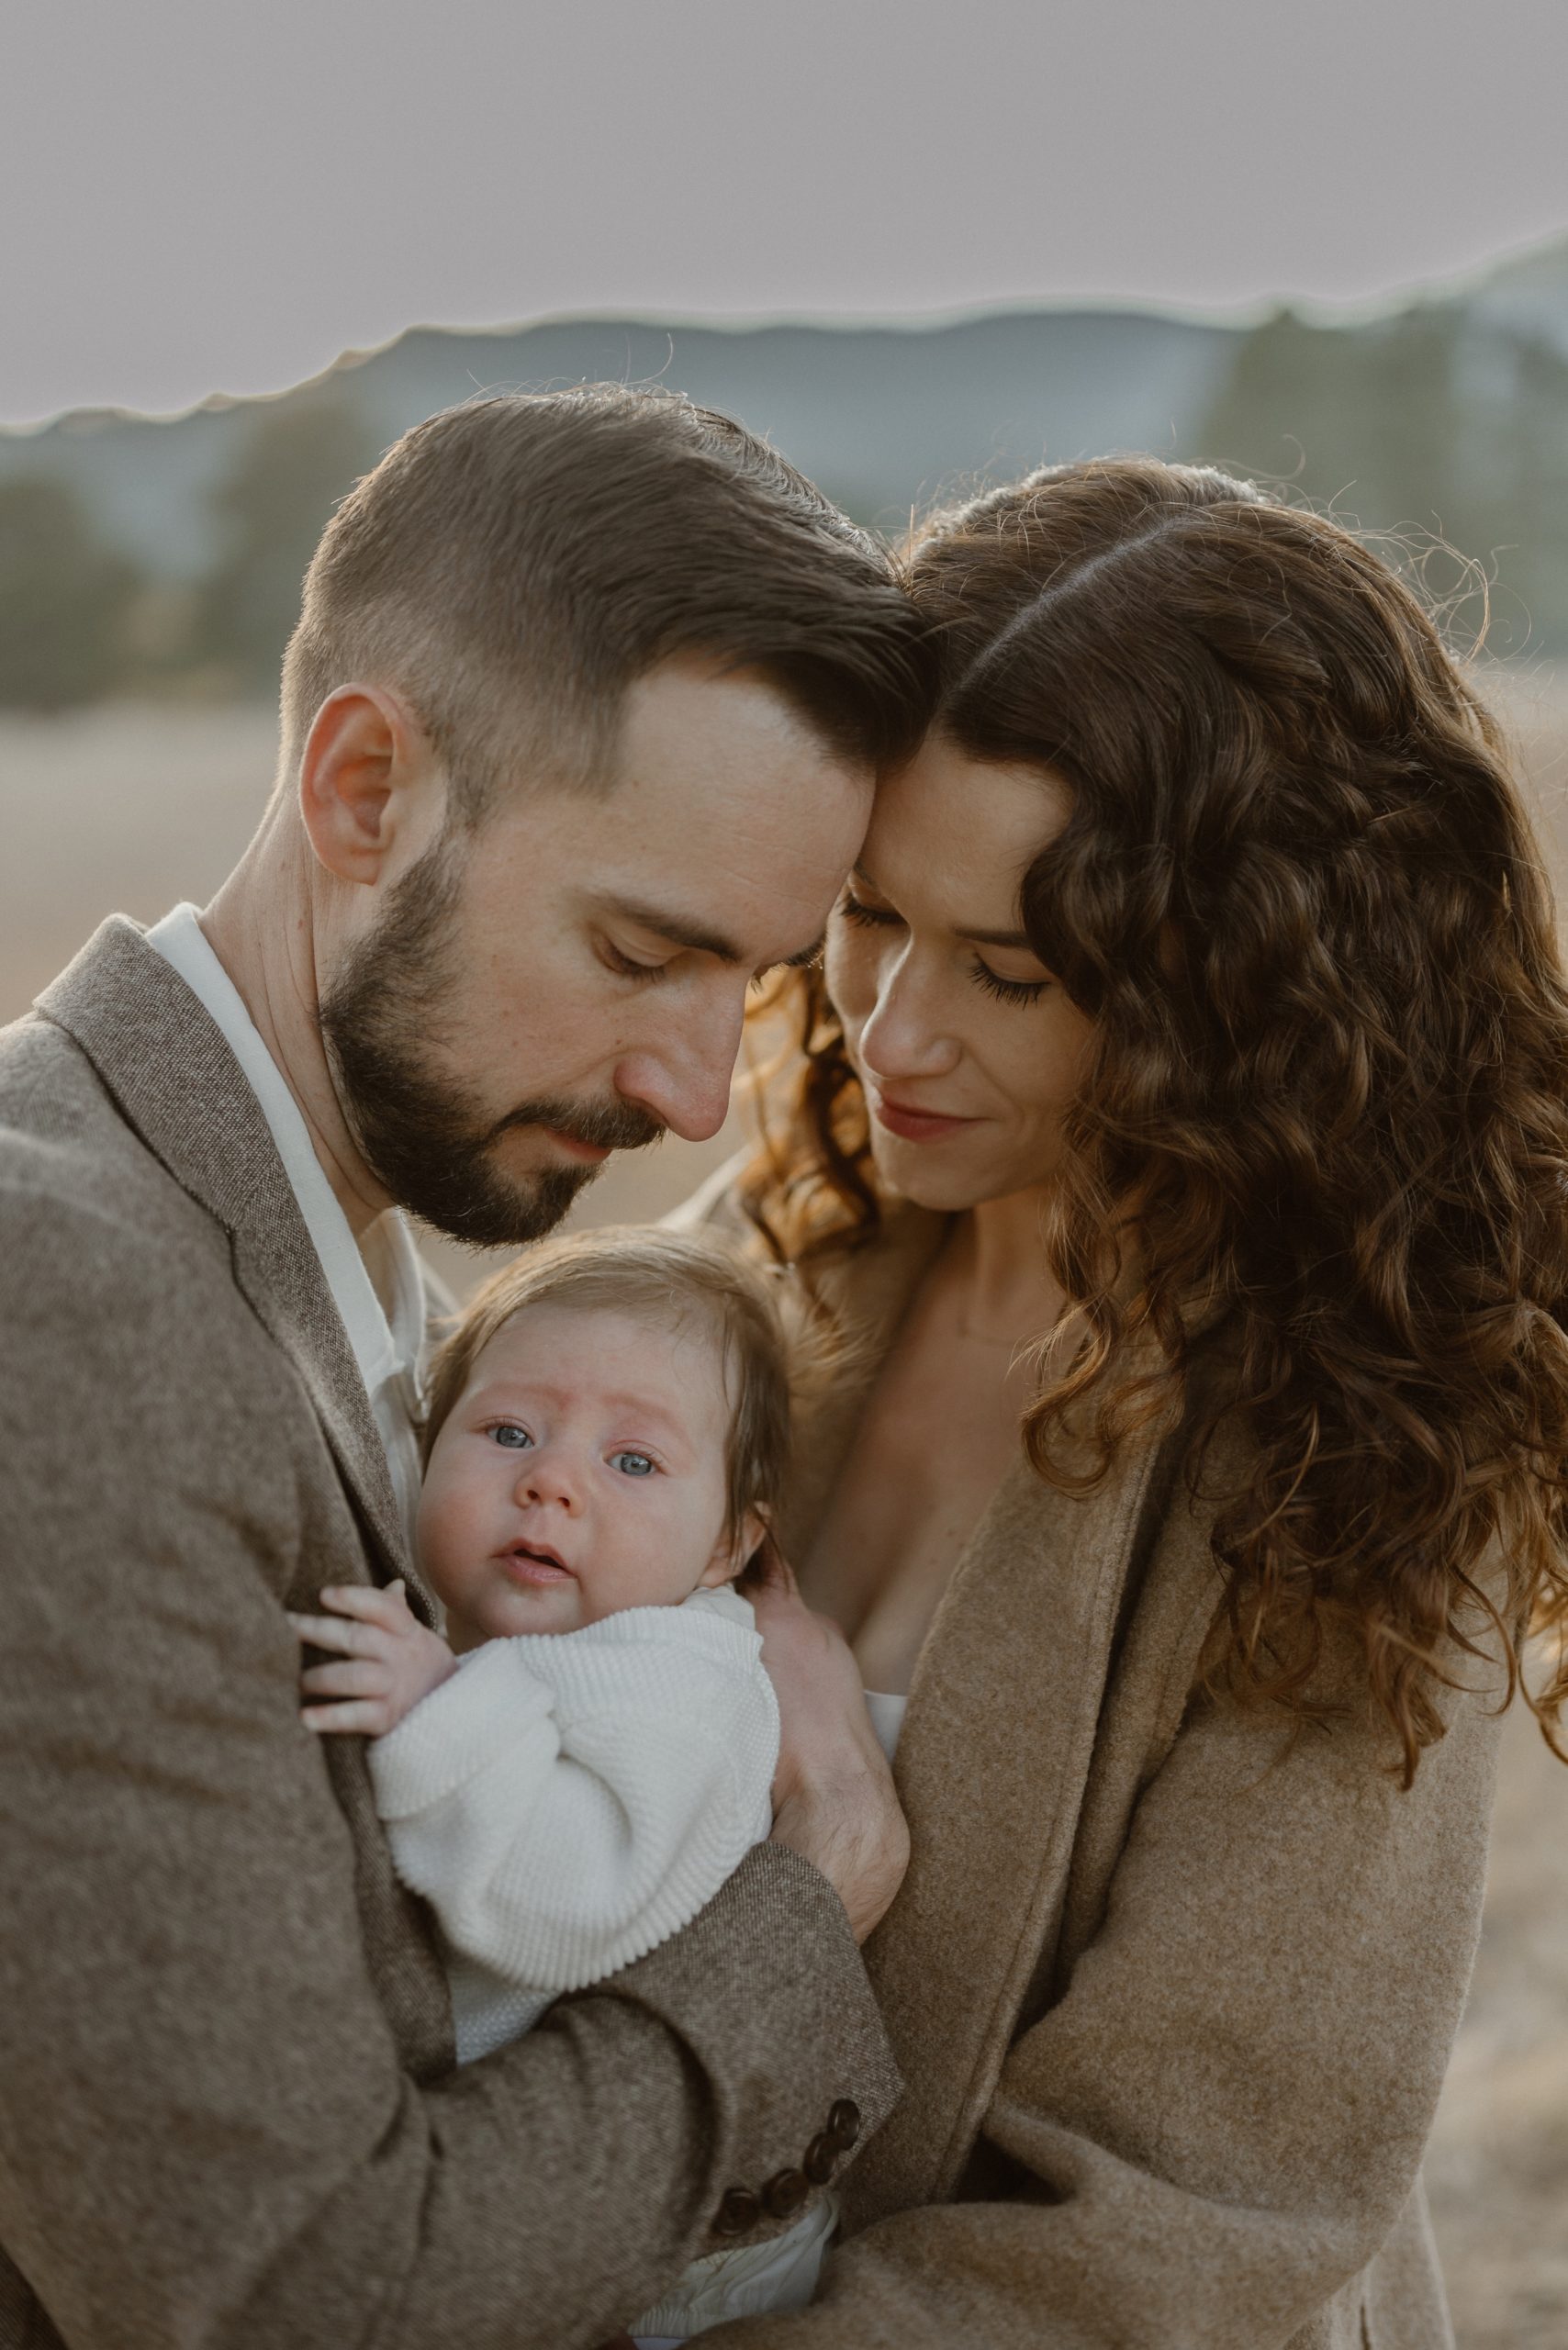 Anti-bride inspired intimate elopement on a fall evening in Evergreen, Colorado. The couple danced in the grass fields together with their newborn baby for their intimate elopement. Photos by Durango wedding photographer, Ashley Joyce Photography.